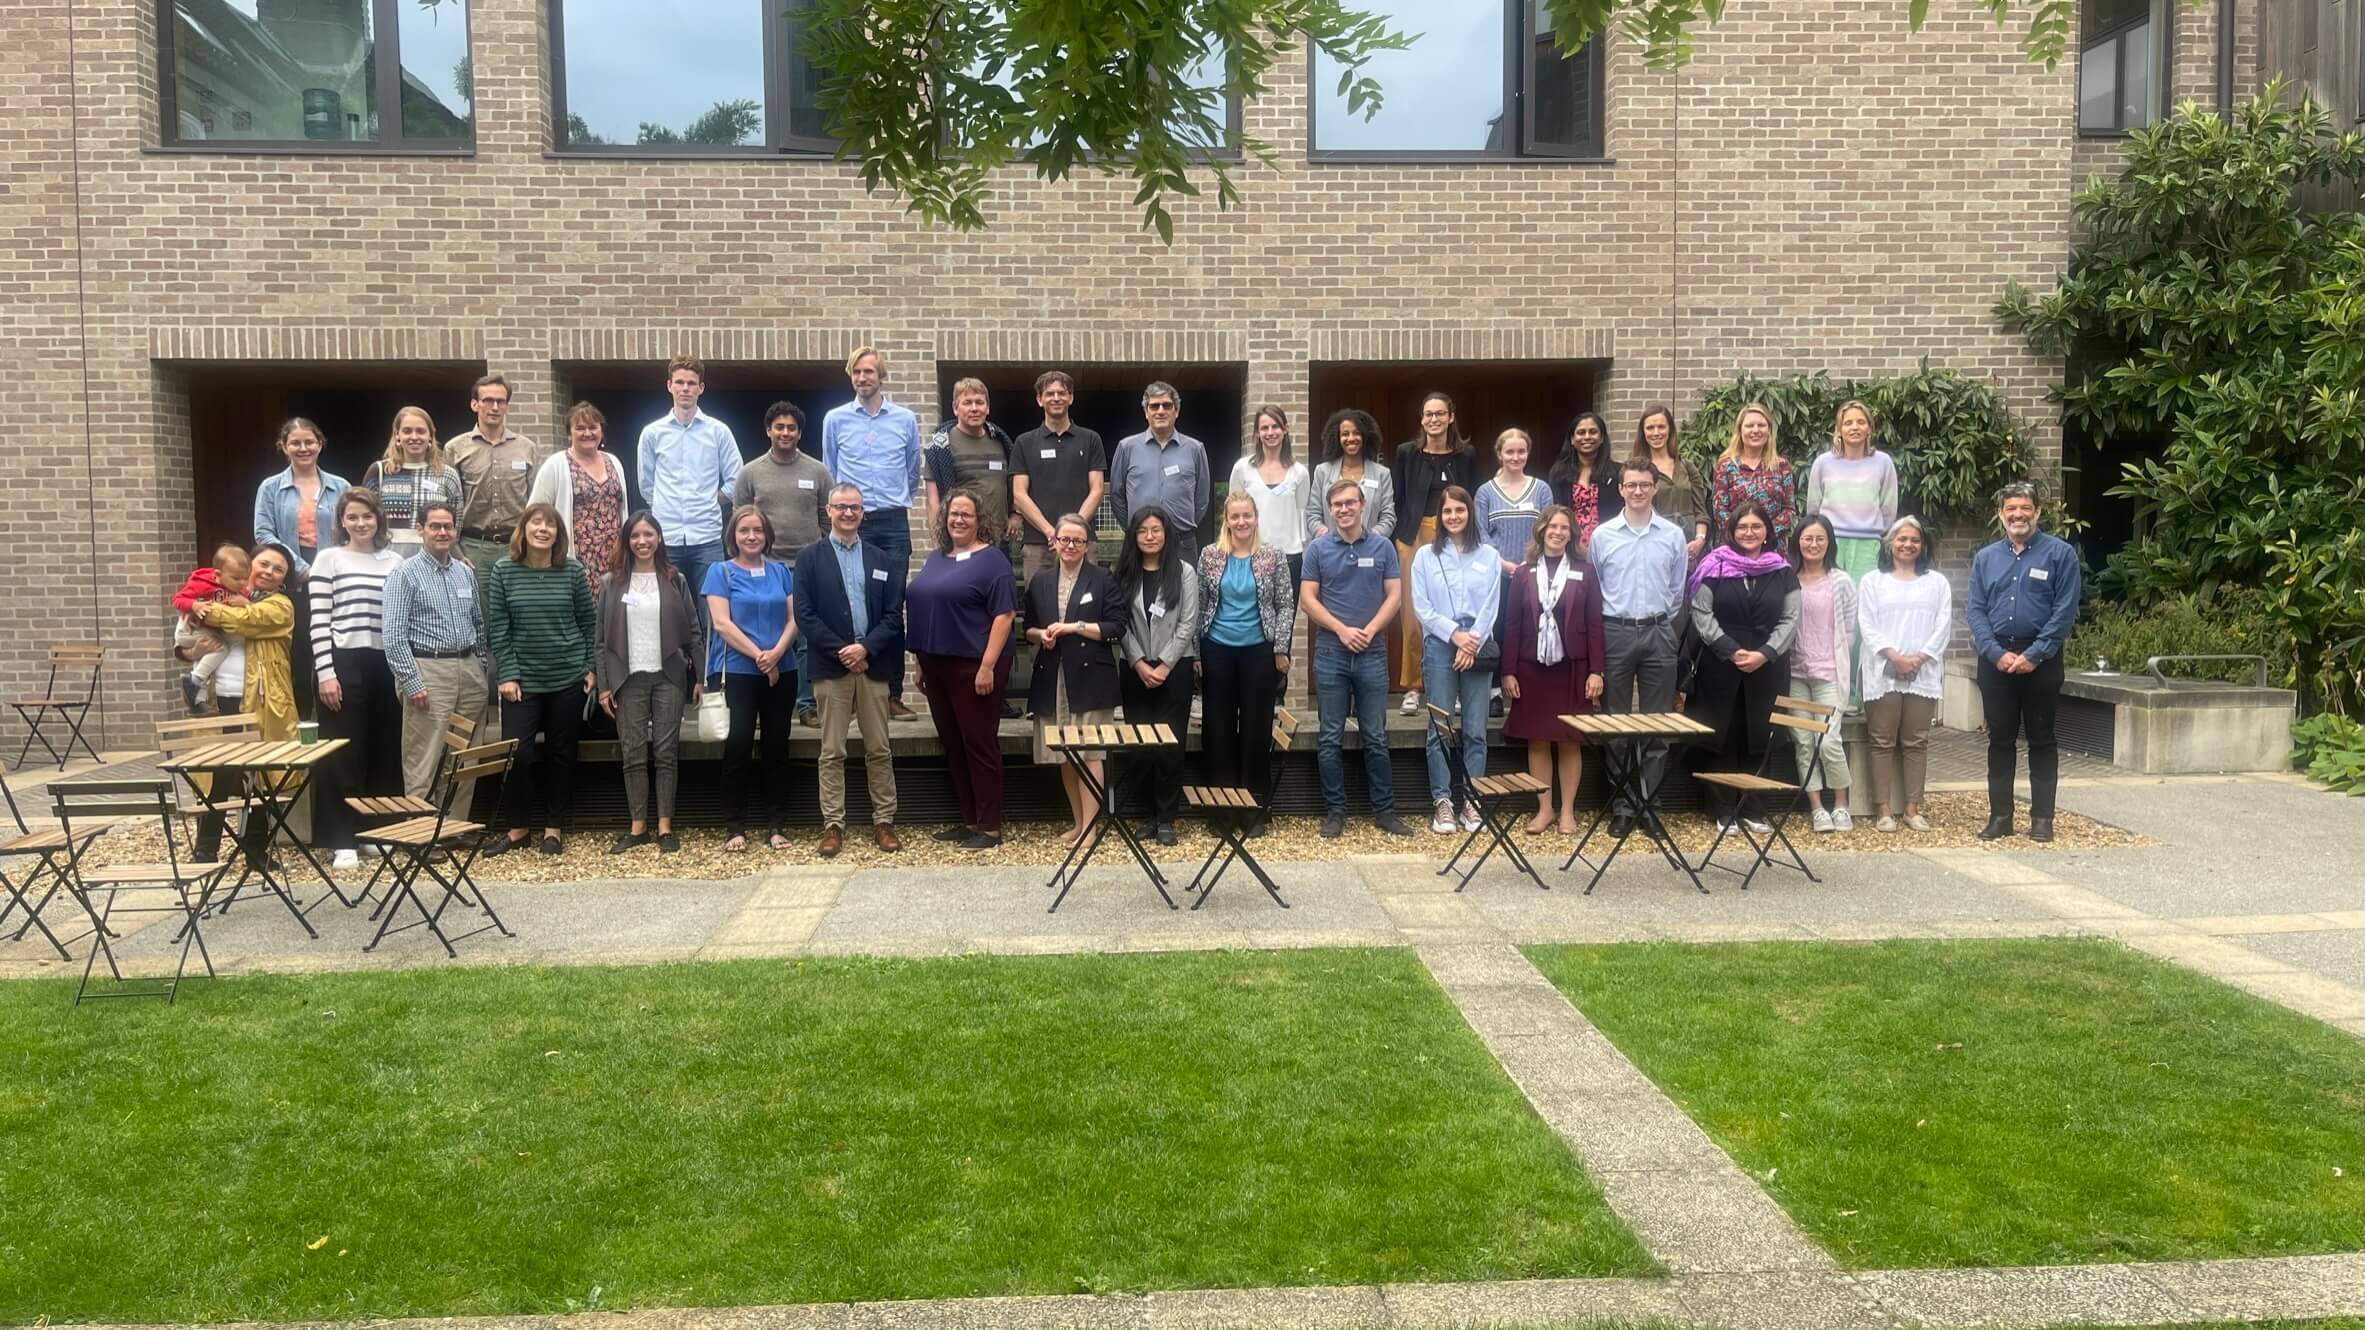 NEST Conference held from 31th of August to 1st of September in Cambridge, United Kingdom. The Conference was organized in conjugation with Perinatal Cambridge Group.